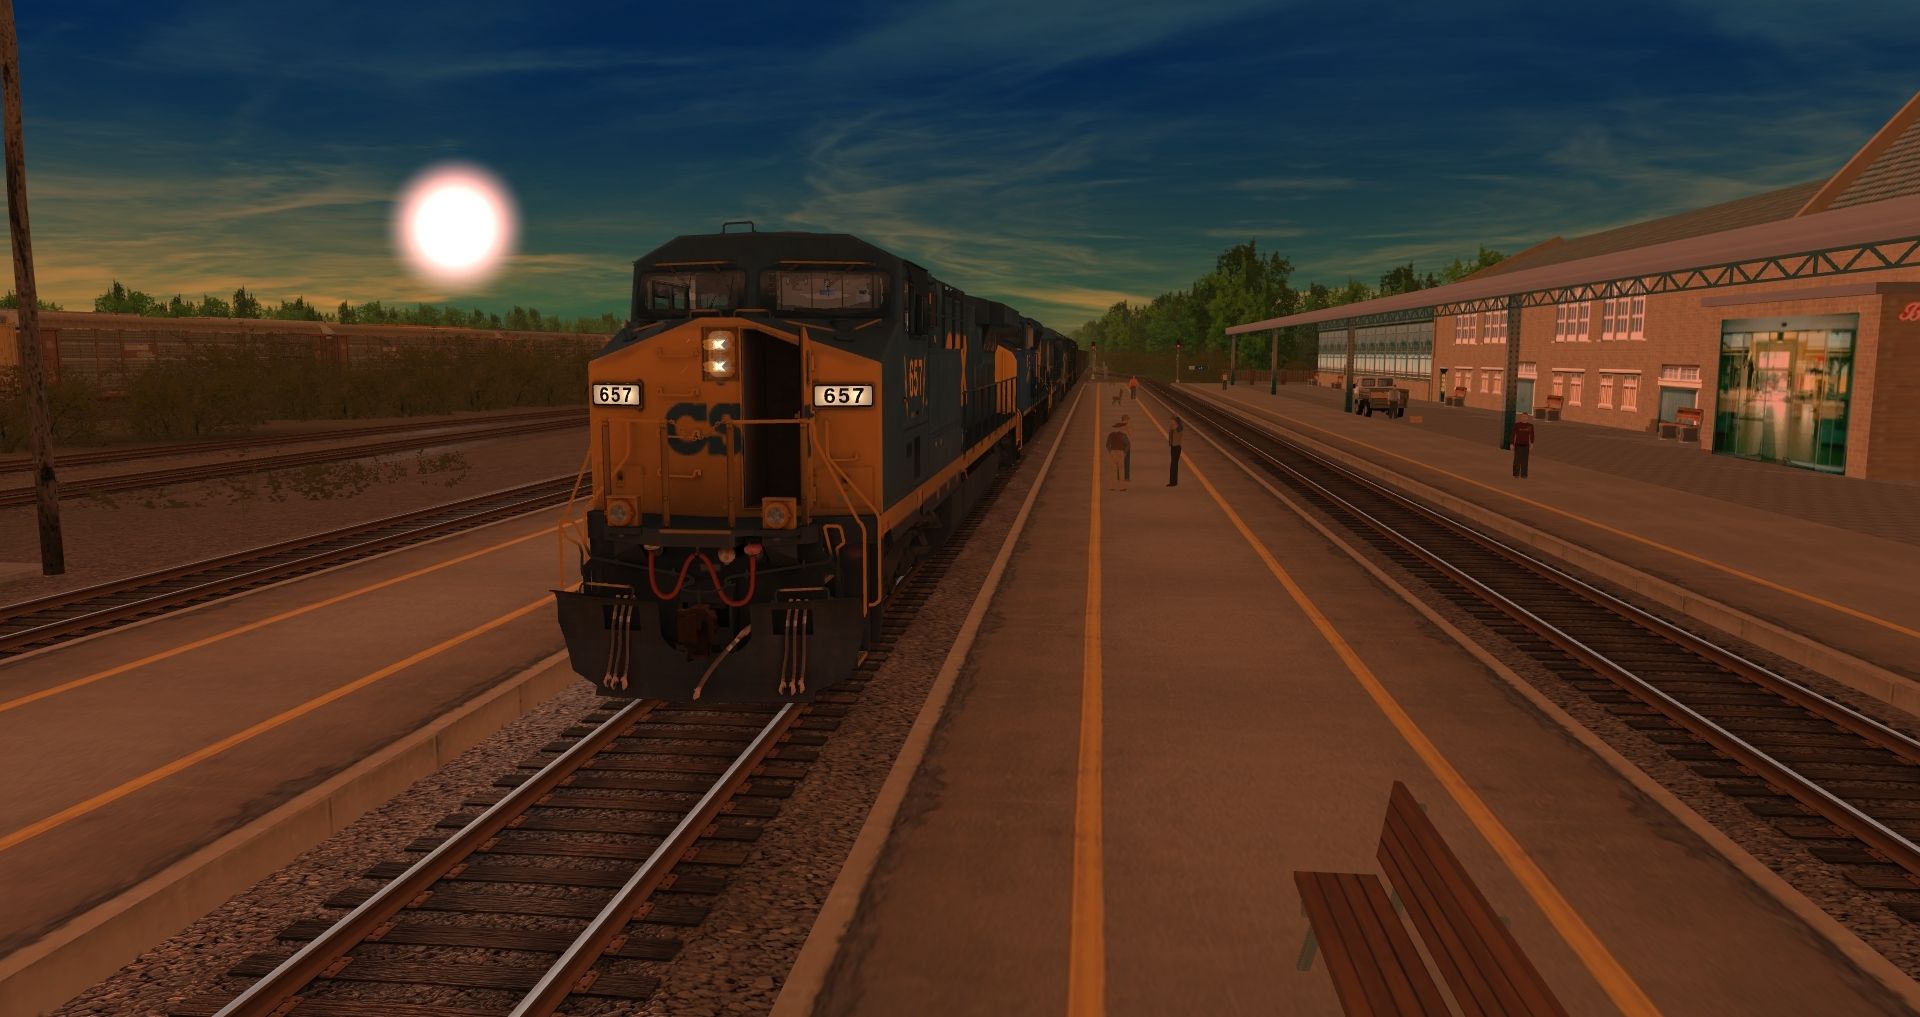 NS-532-gets-a-recrew-before-continuing-the-long-journey-east..jpg